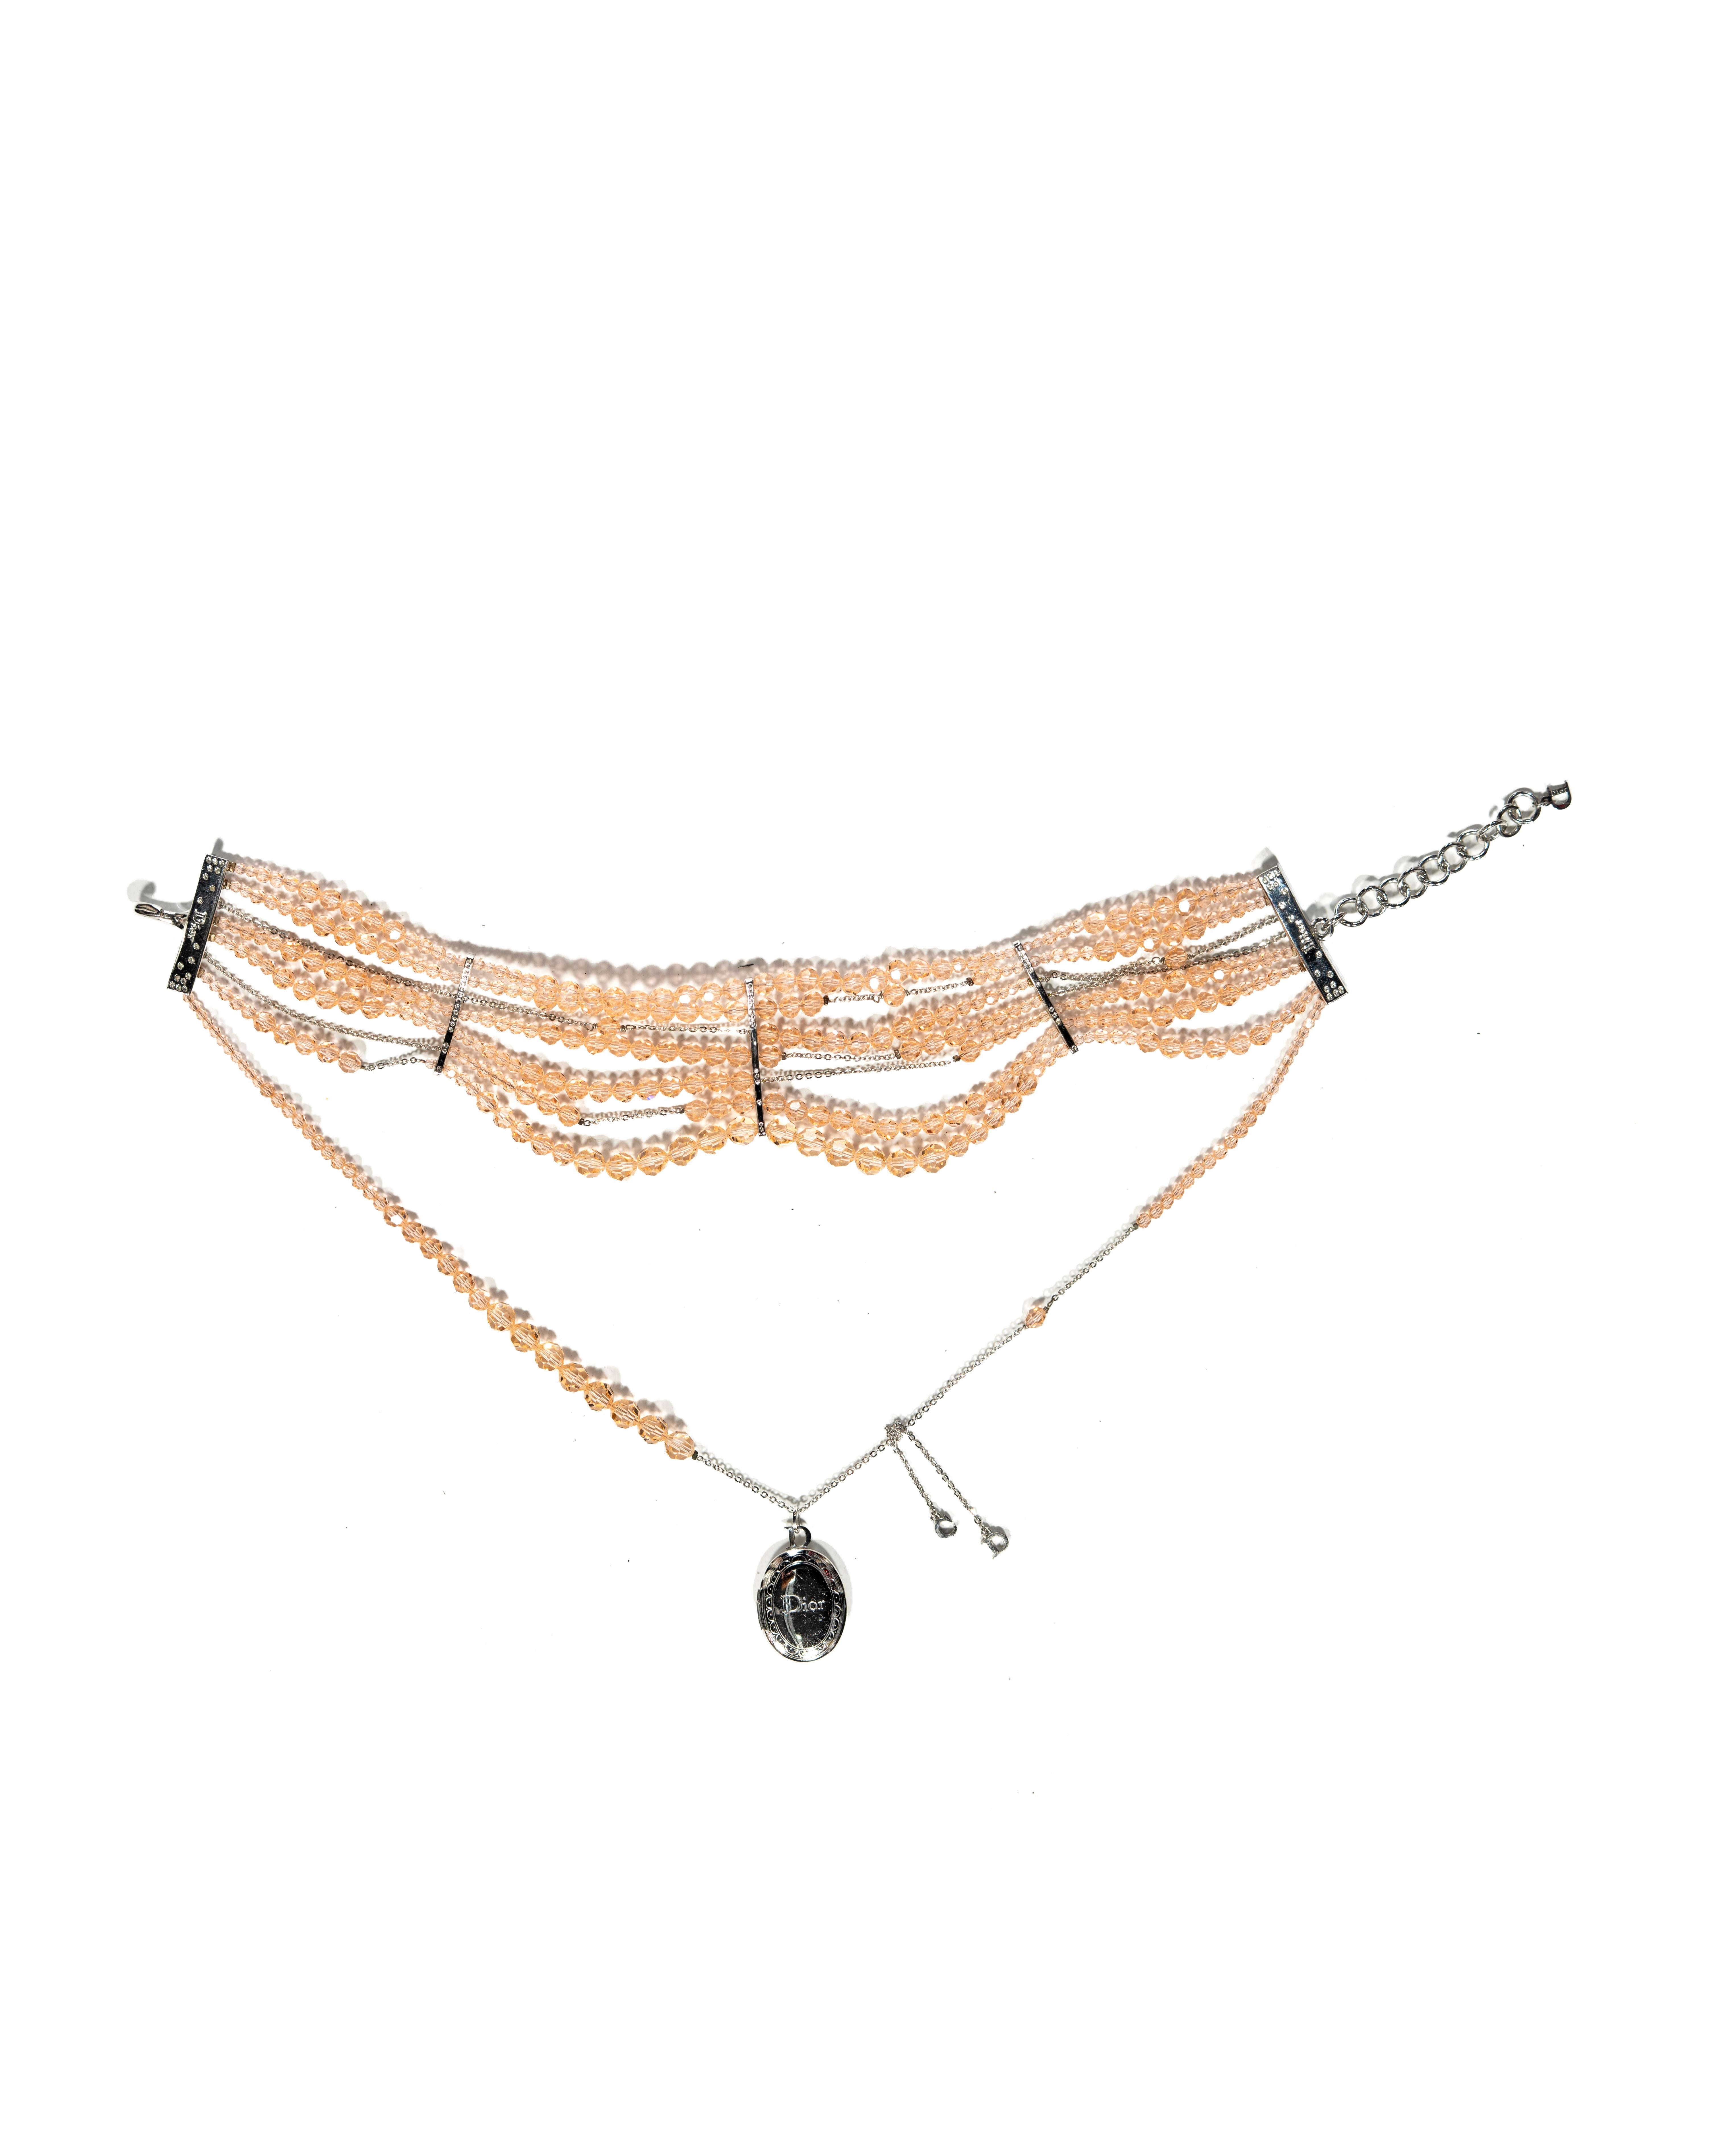 ▪ Archival Christian Dior Distressed 'Masai' Choker Necklace 
▪ Creative Director: John Galliano 
▪ c. 2004
▪ Sold by One of a Kind Archive 
▪ Embellished with seven strands of clear peach faceted glass beads
▪ The centerpiece showcases an